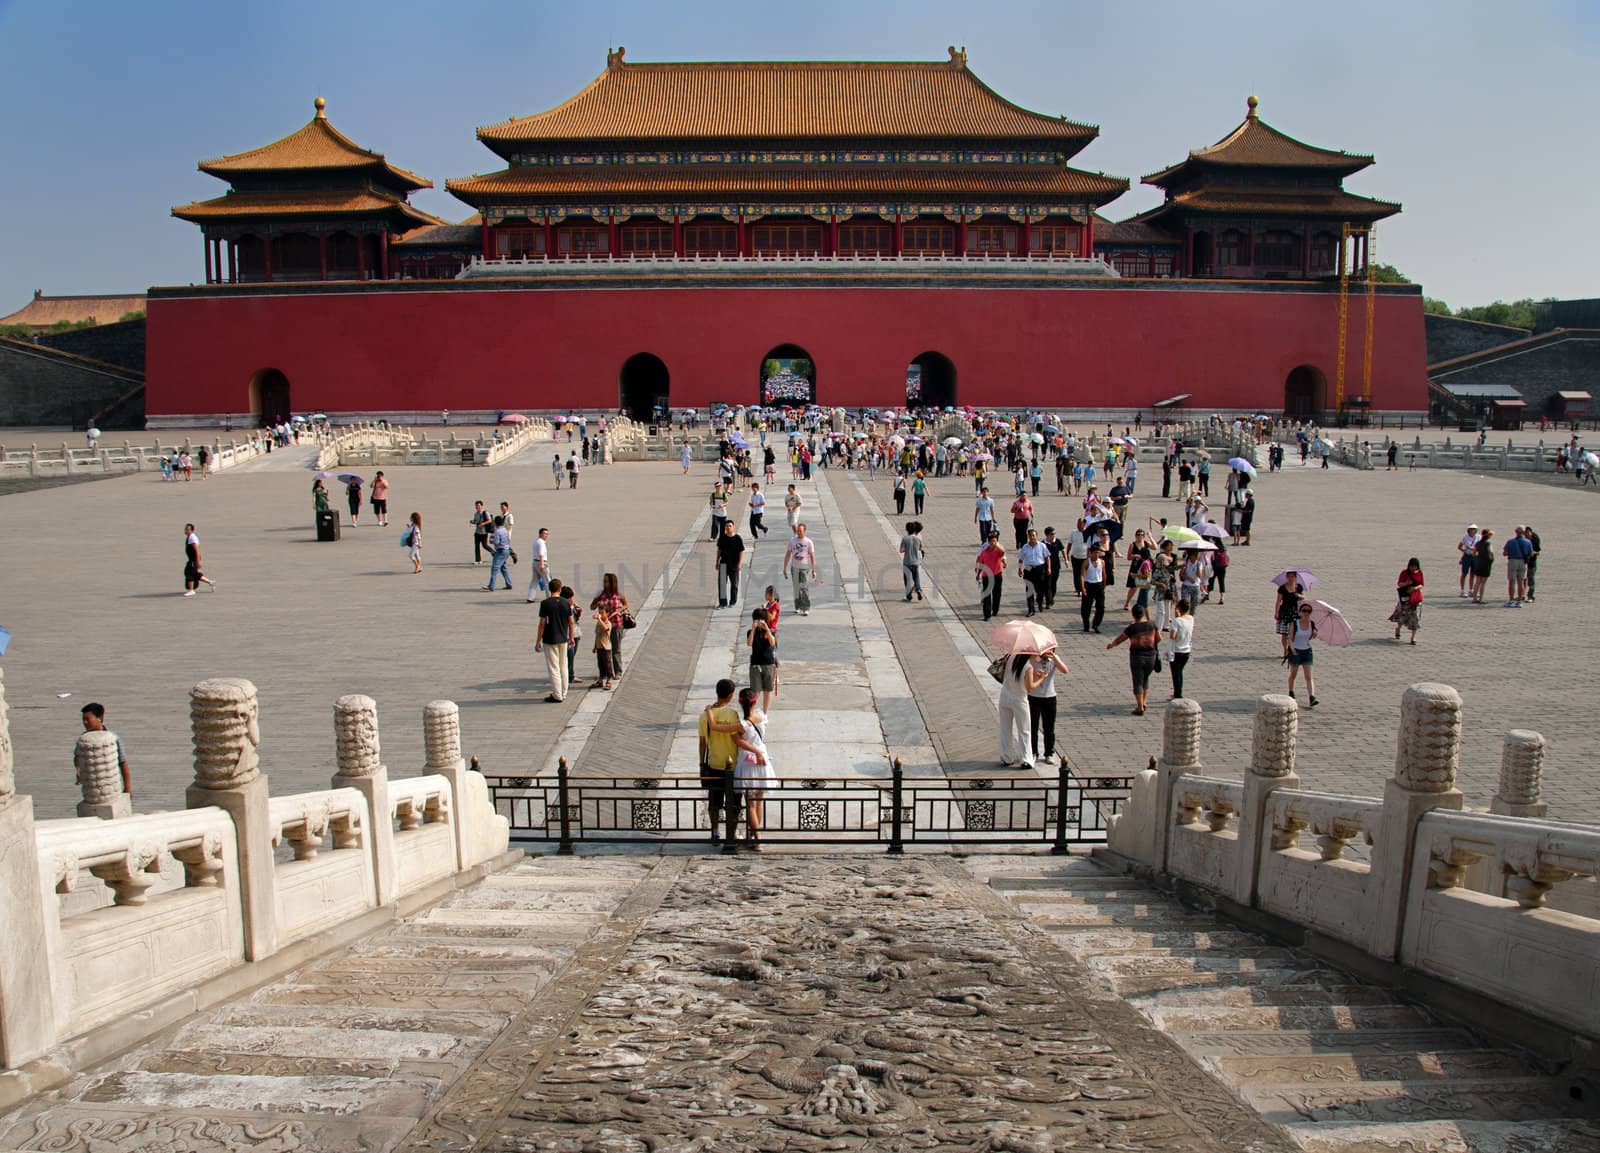 The front entrance to The Forbidden City in Beijing, China, July 20 2010. To relieve congestion 70% of the Forbidden City is to open to the public by 2020, instead of the current 30%.